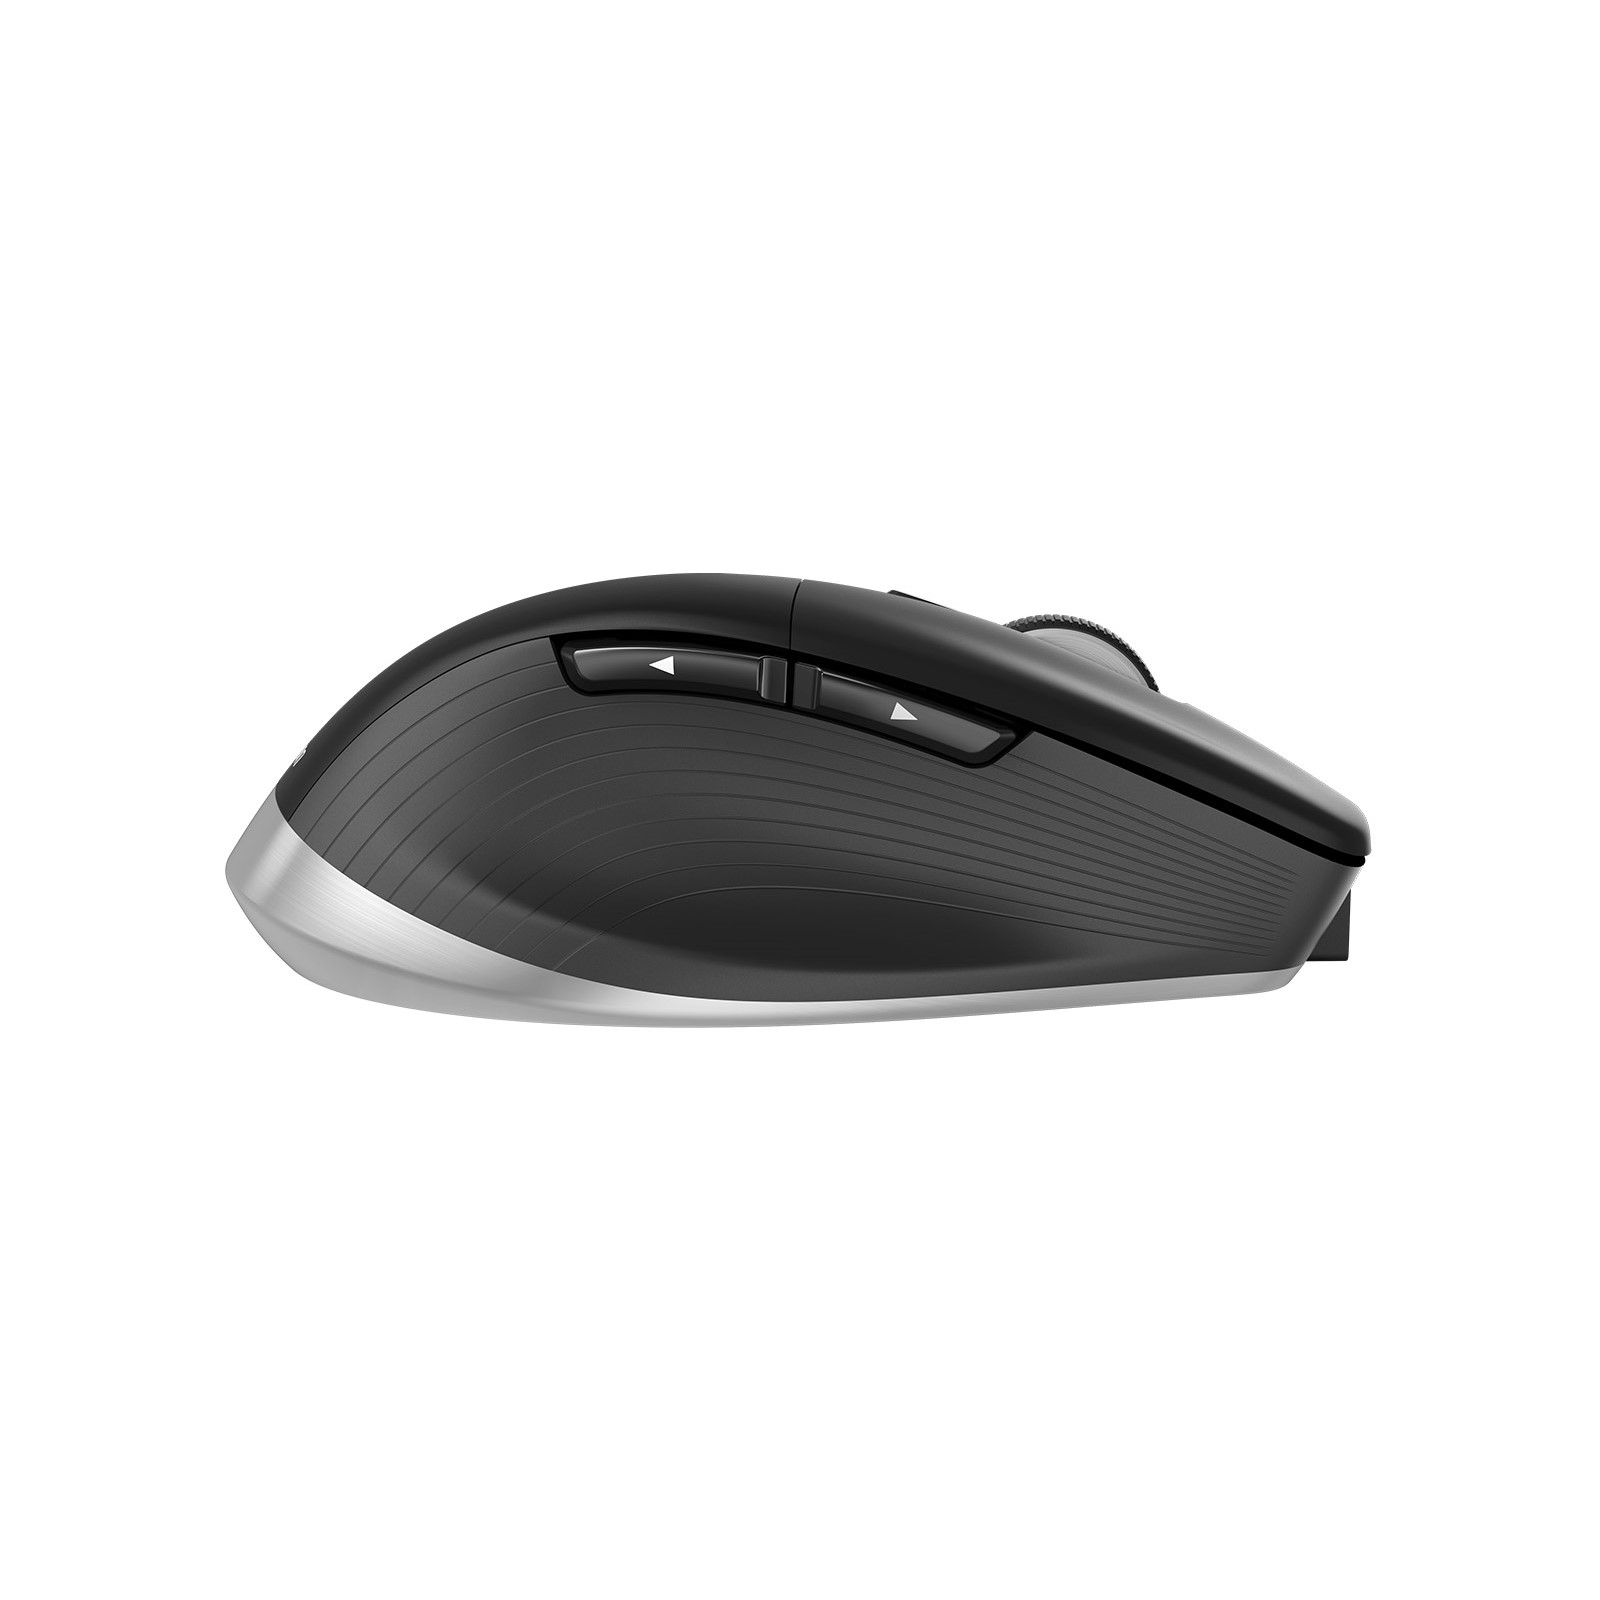 3Dconnexion CadMouse Pro Wireless Left | SOLIDBOX - EMPOWER YOURSELF